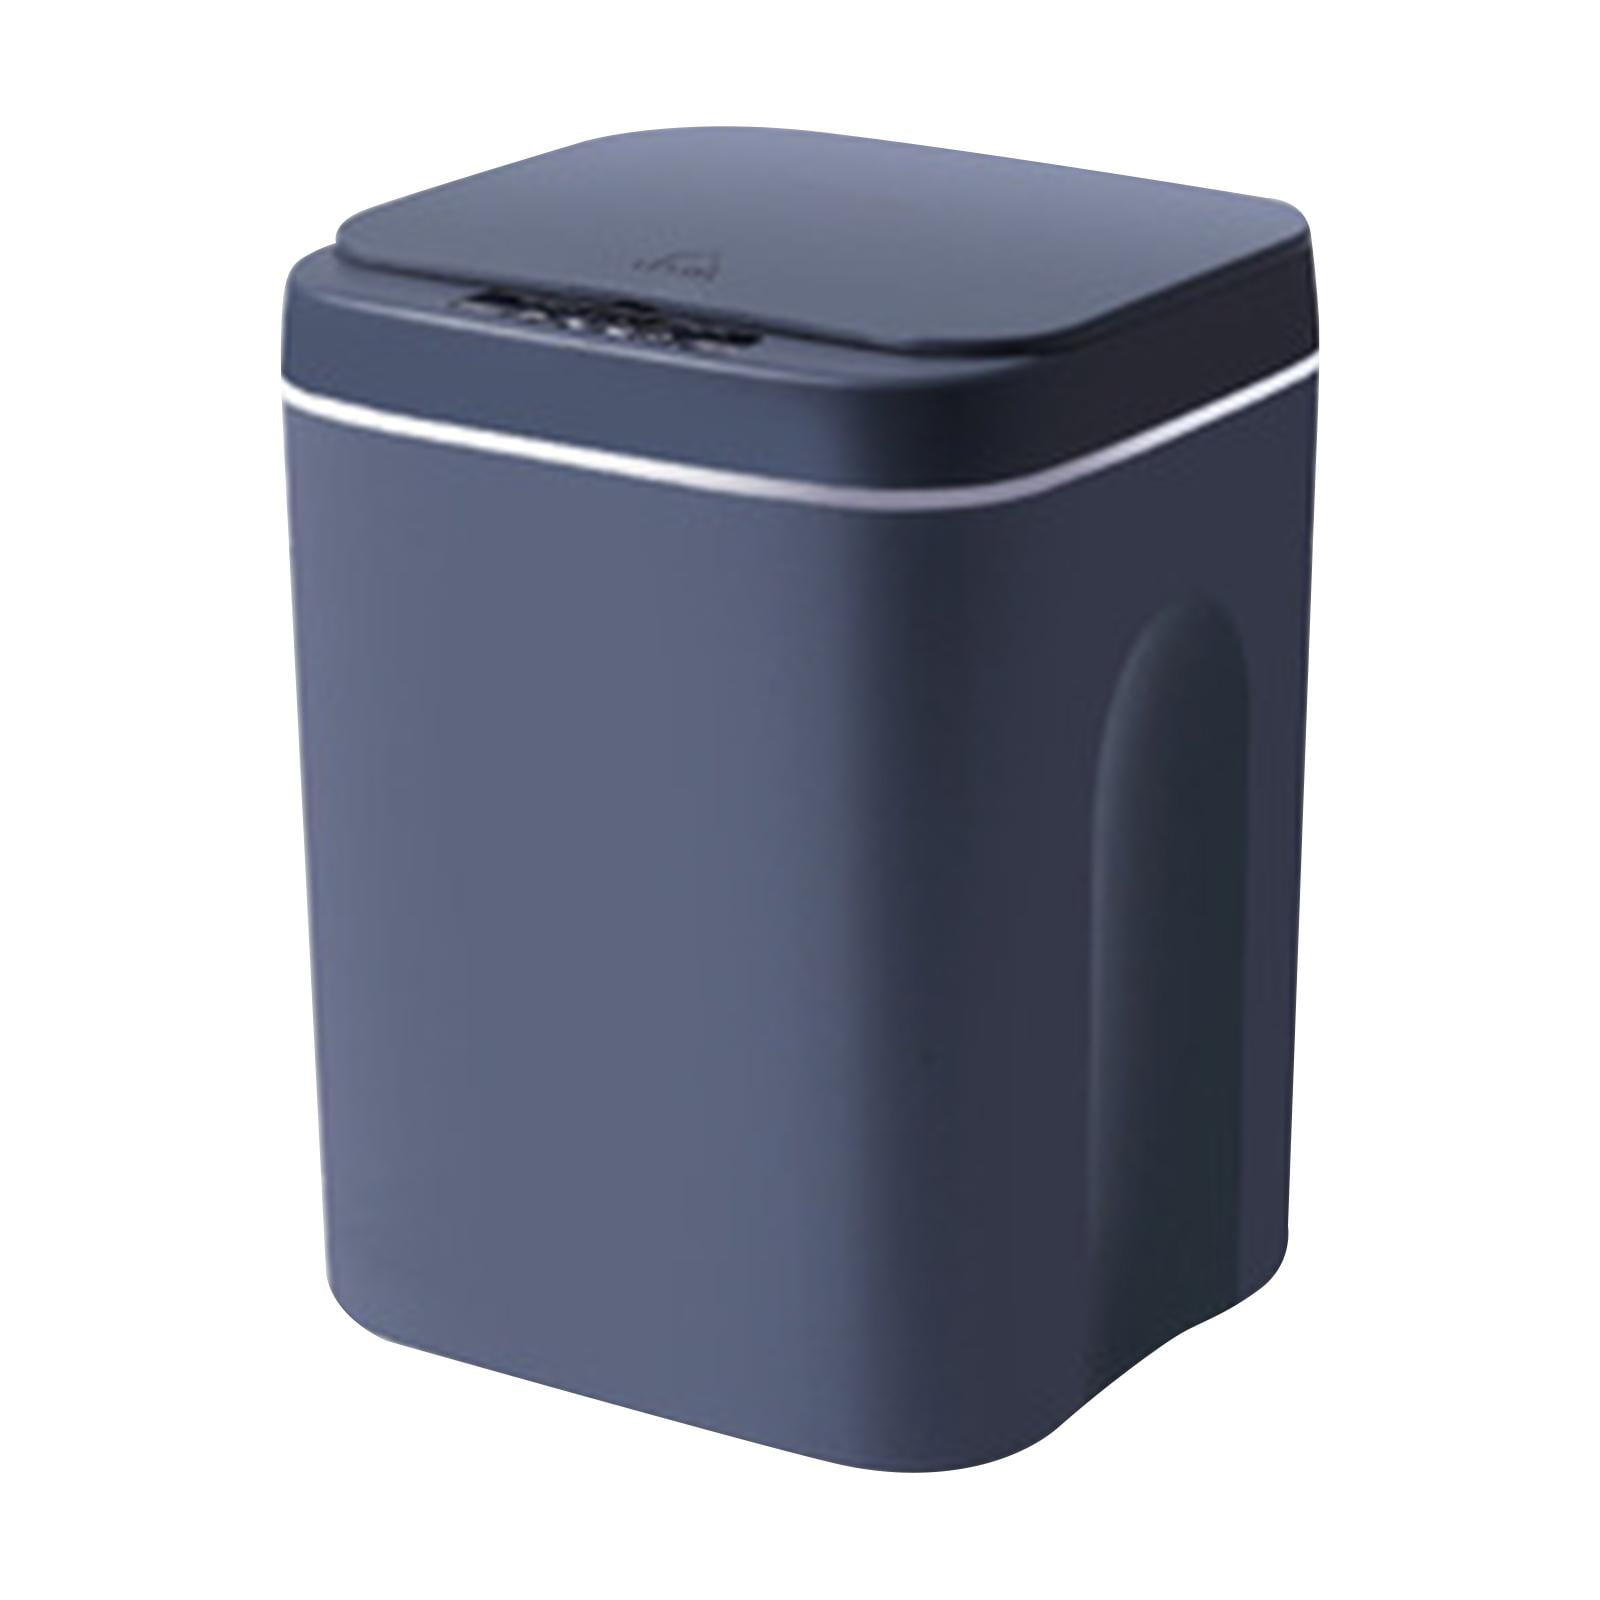 Details about   Large Automatic Touchless Bin Smart Induction Trash Can Kitchen Bathroo 